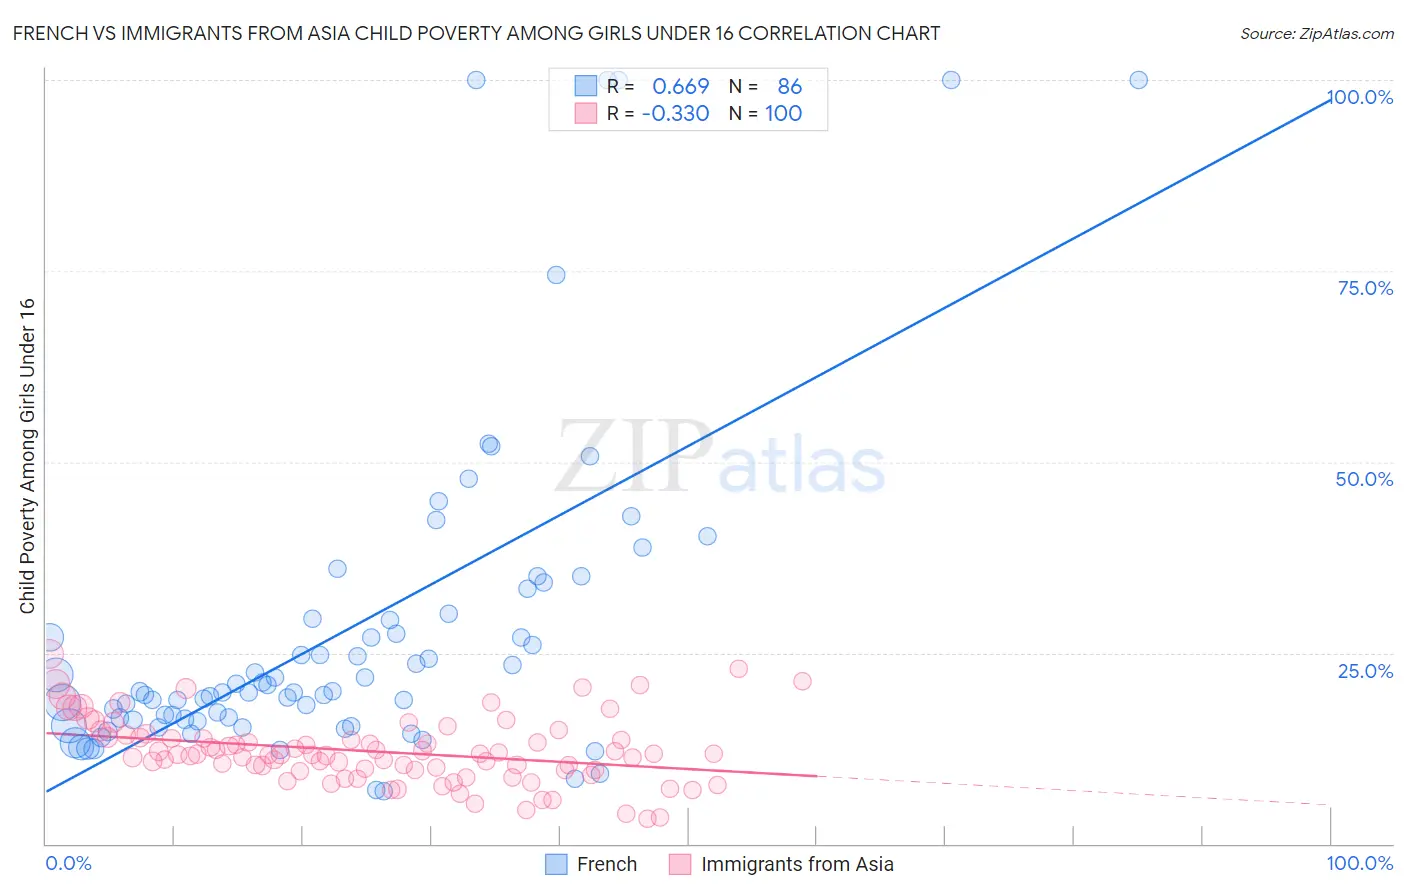 French vs Immigrants from Asia Child Poverty Among Girls Under 16